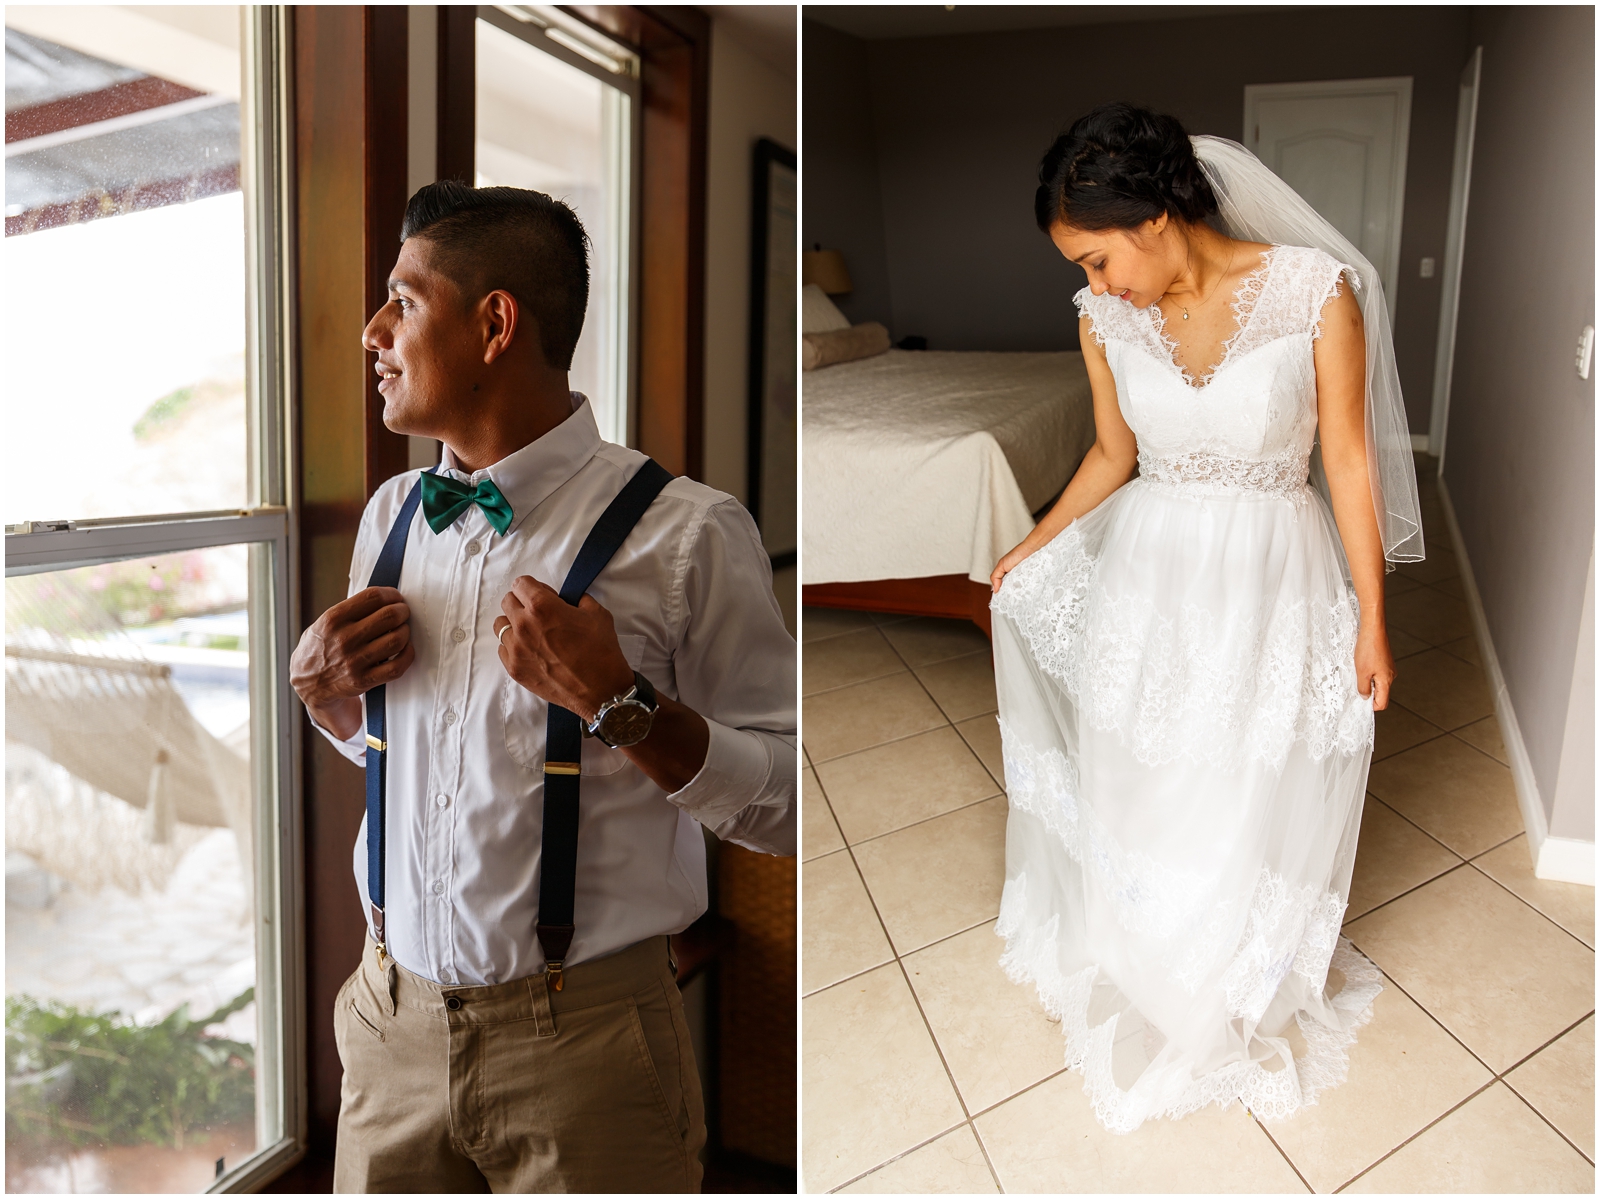 This couple getting ready for their small Nicaraguan destination wedding.